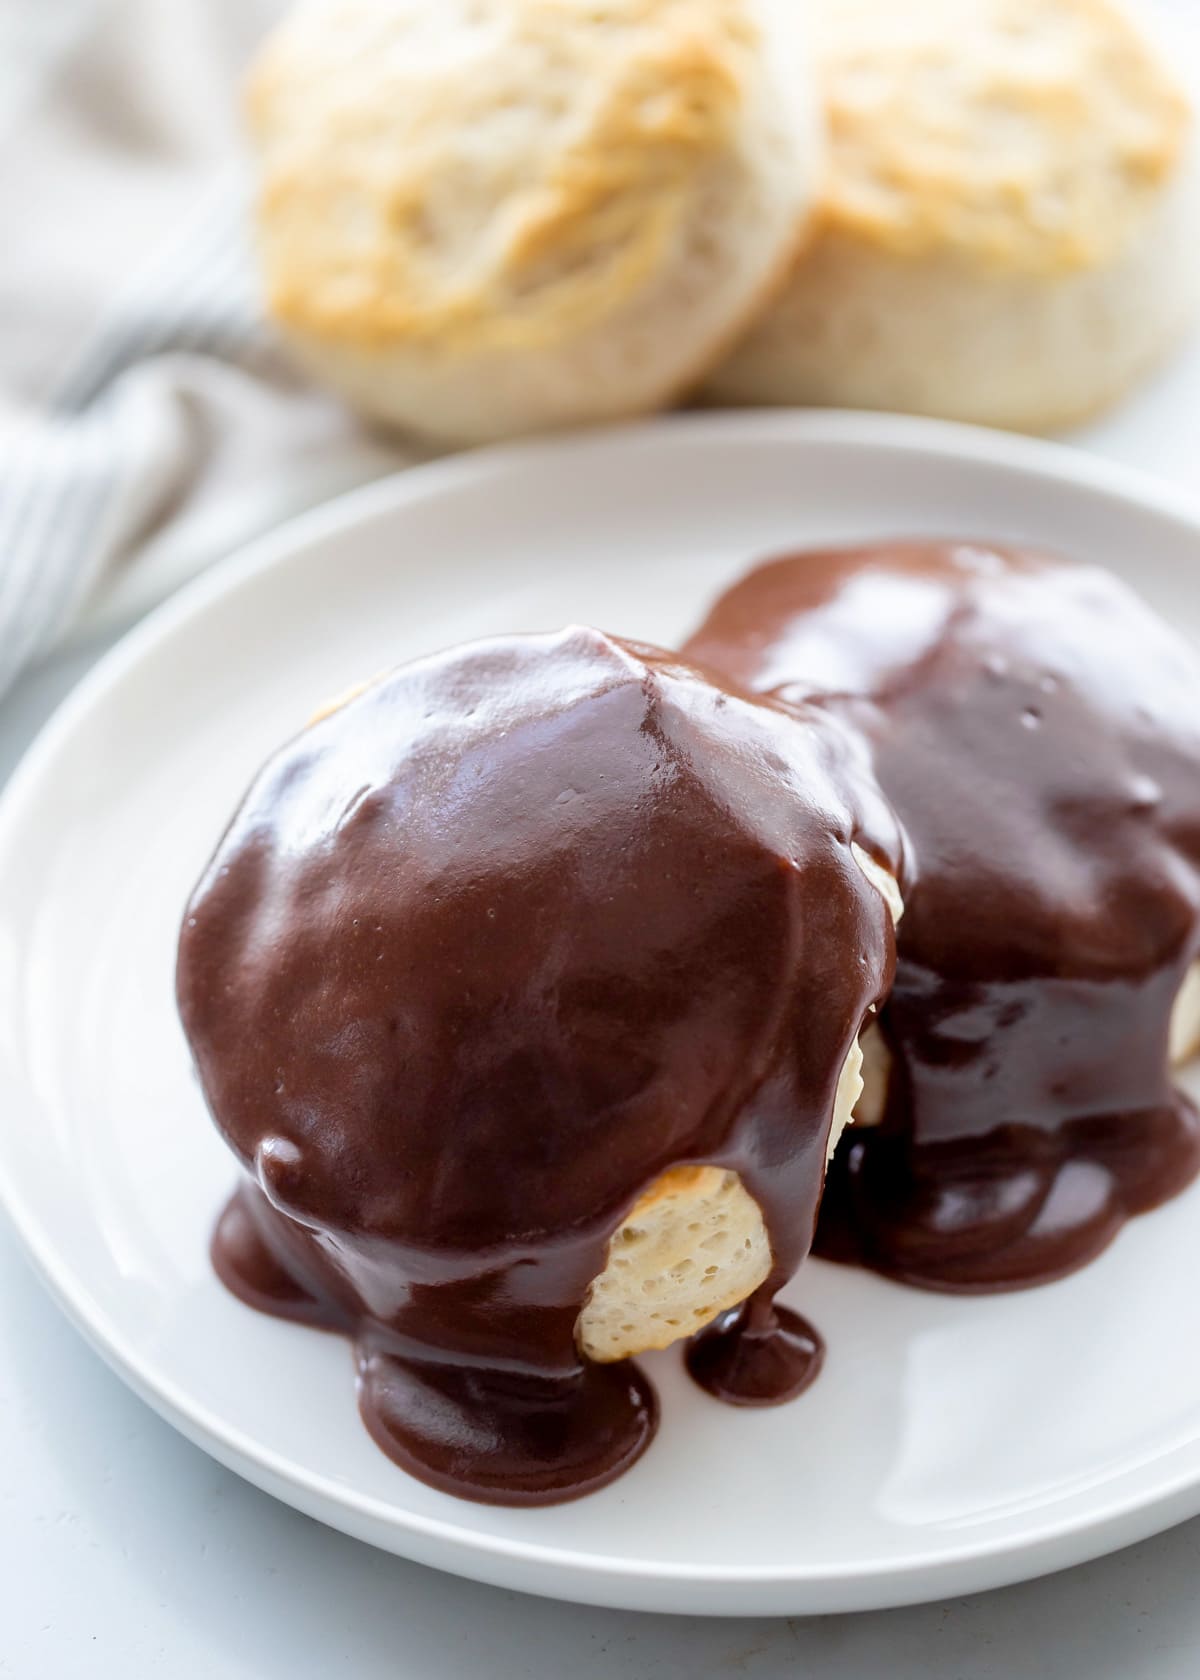 Chocolate gravy served over biscuits on a white plate.